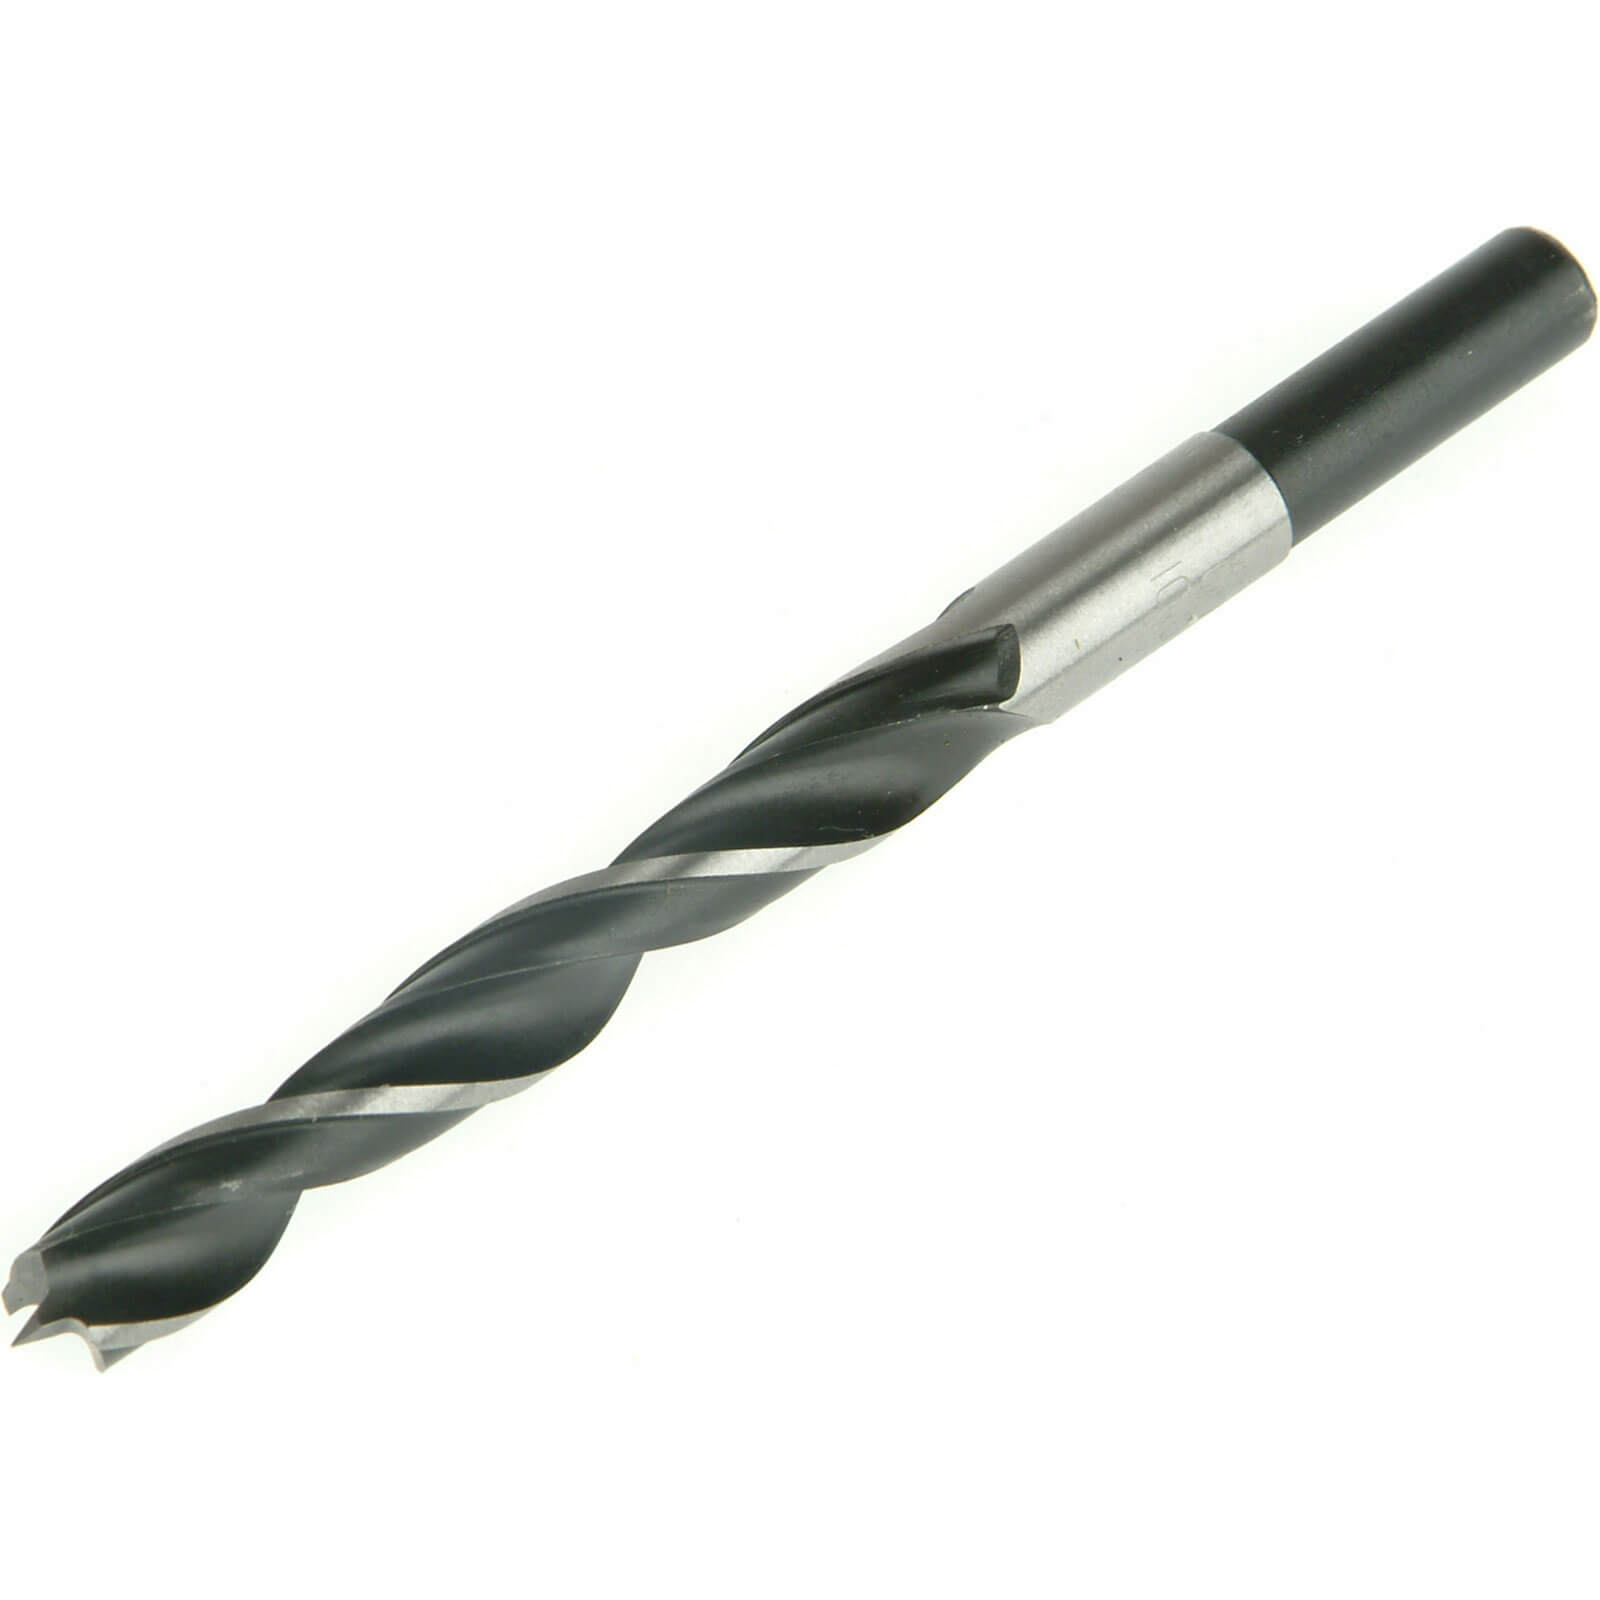 Photo of Faithfull Lip And Spur Wood Drill Bit 4mm